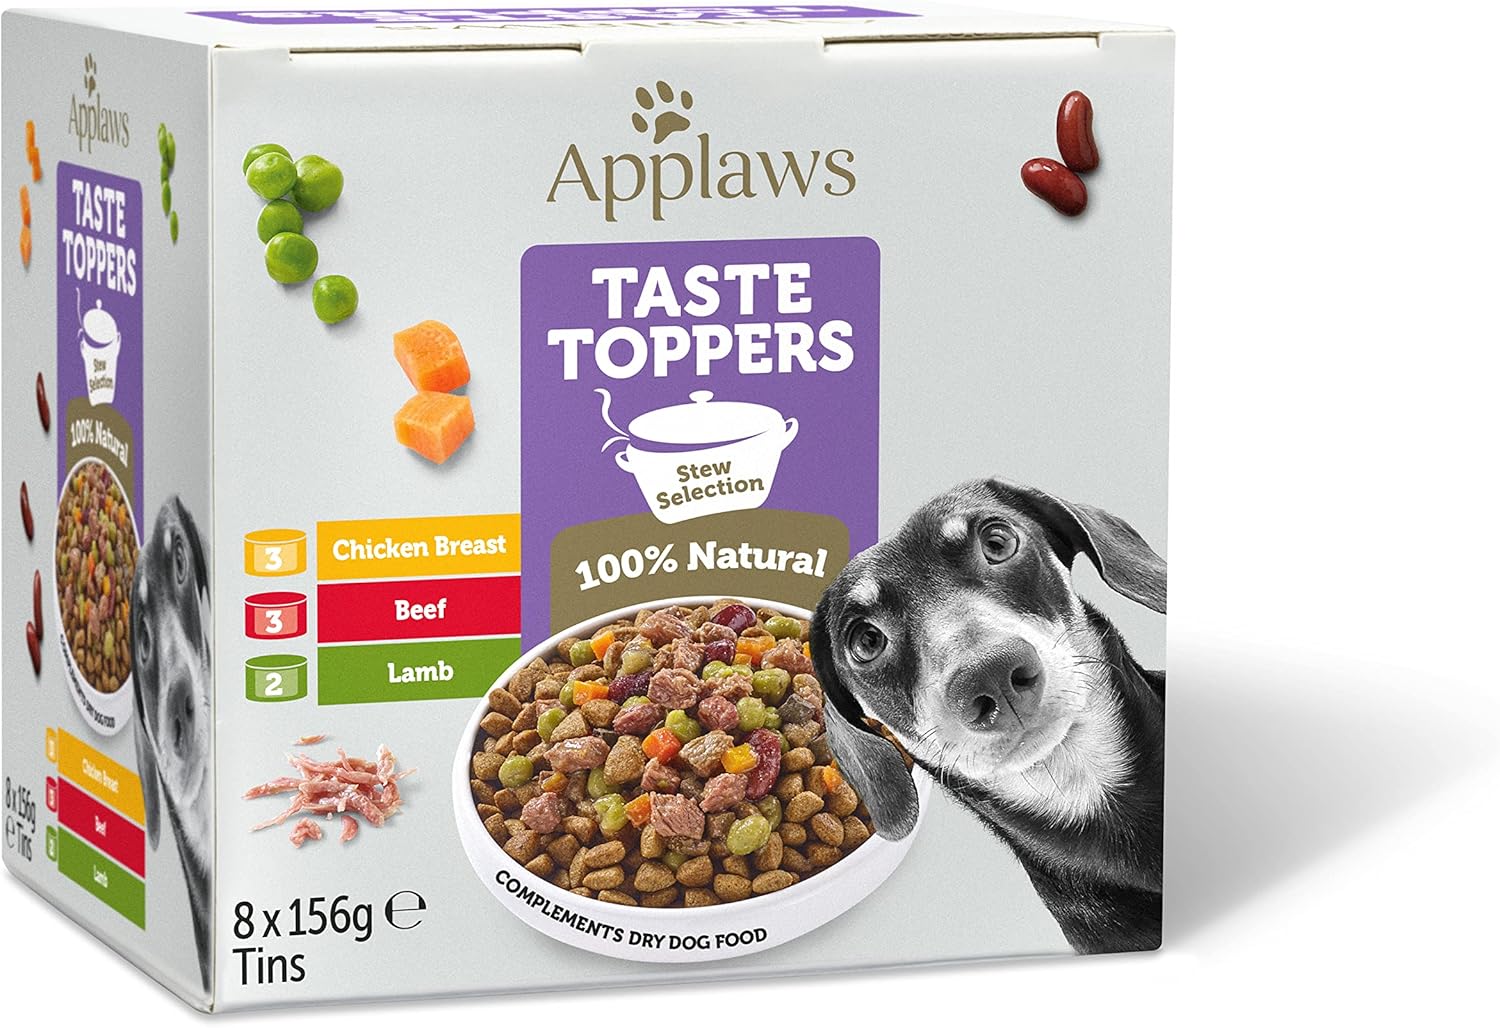 Applaws 100% Natural Wet Dog Food Tin, Grain Free Meat Selection with Vegetables in Stew Tin 8 x 156g Tins?TT3500CE-A